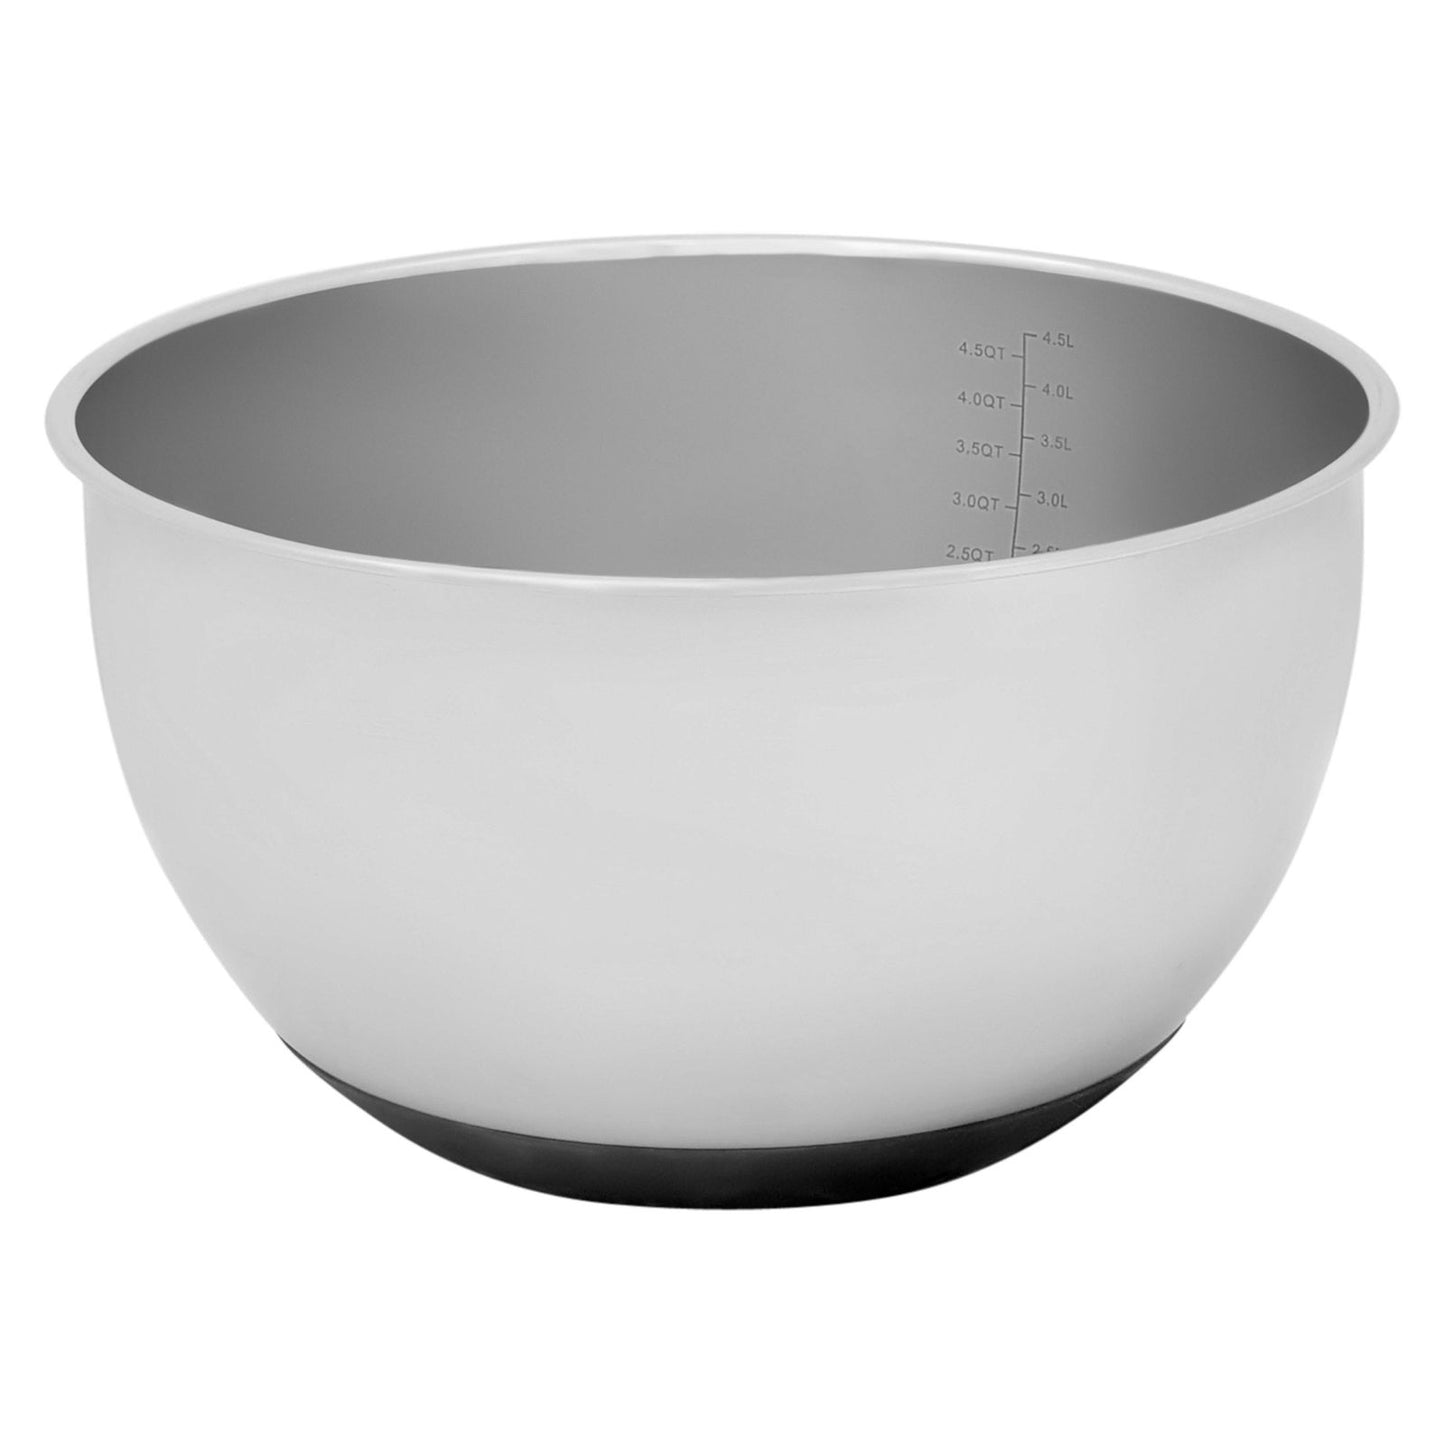 Westinghouse Mixing Bowl Set 2 Piece Stainless Steel -  -  